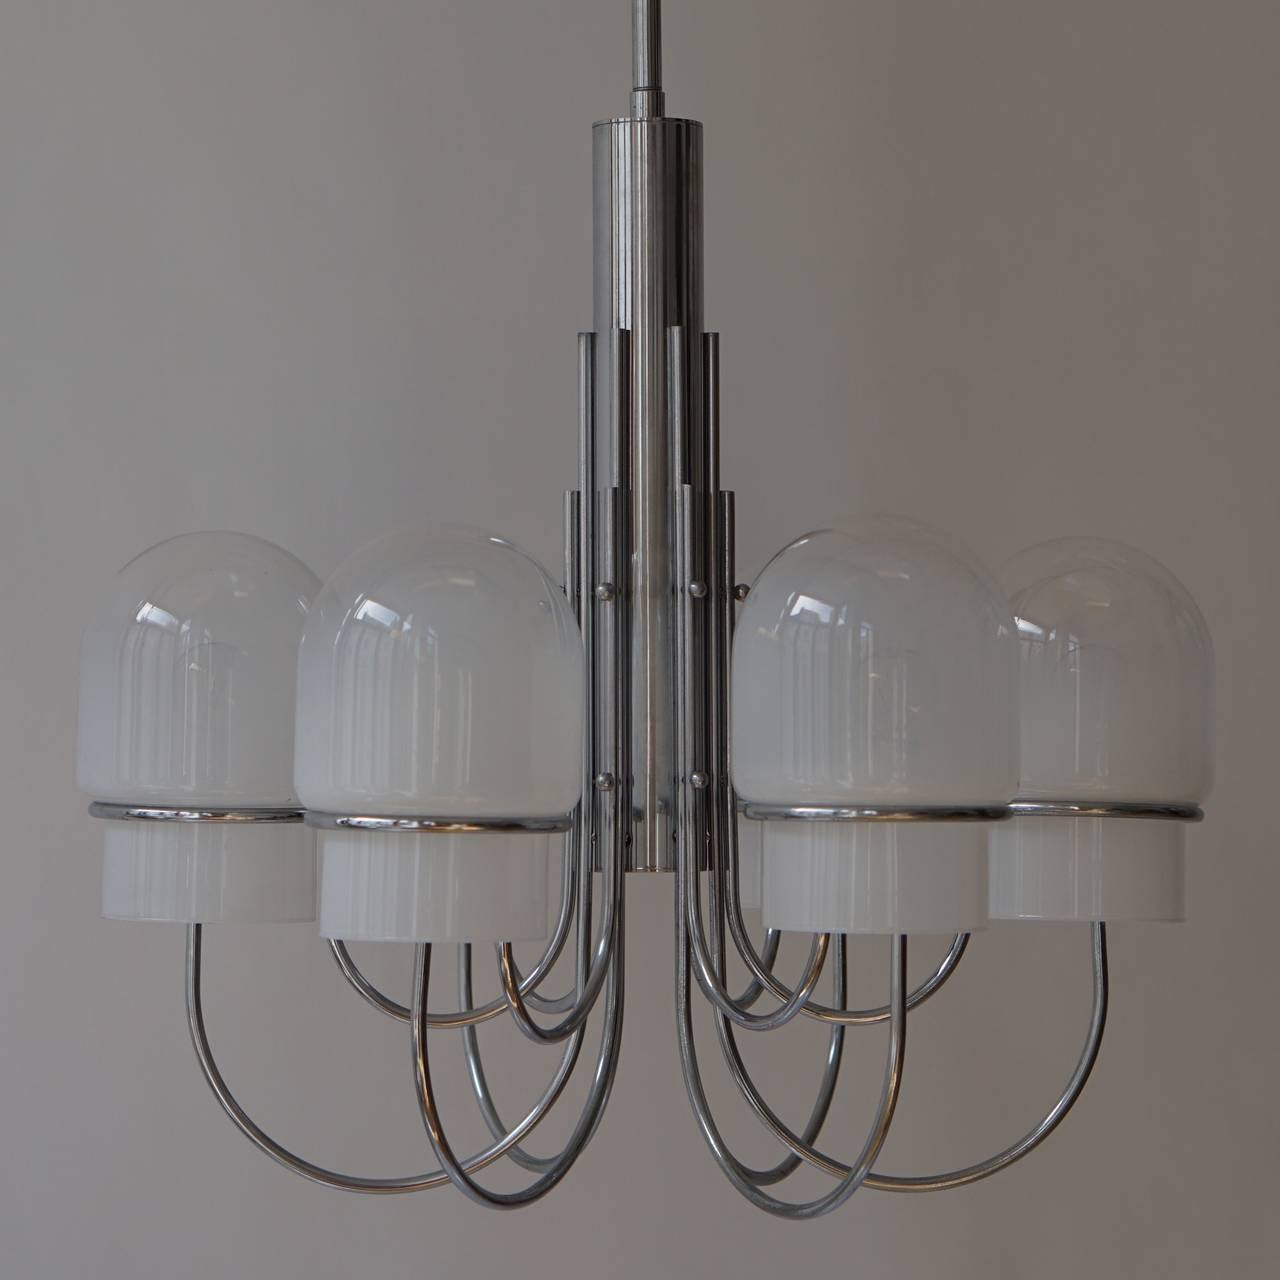 Italian Six Arched Arm Chrome and Milk Glass Chandelier, circa 1960s For Sale 1